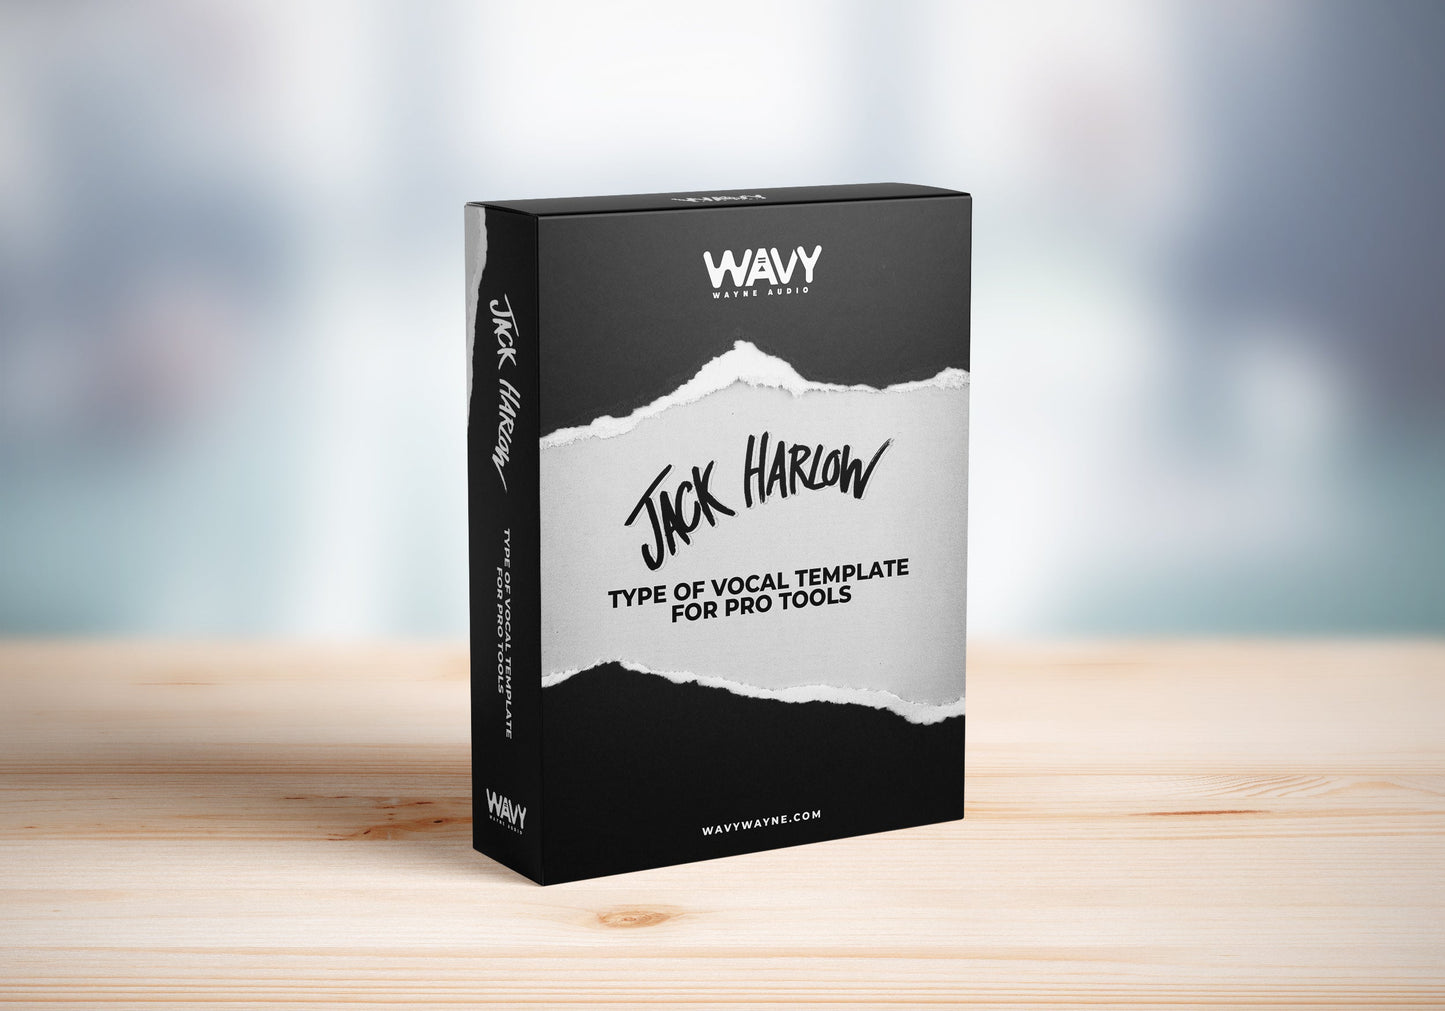 Jack Harlow Type Vocal Template for Pro Tools